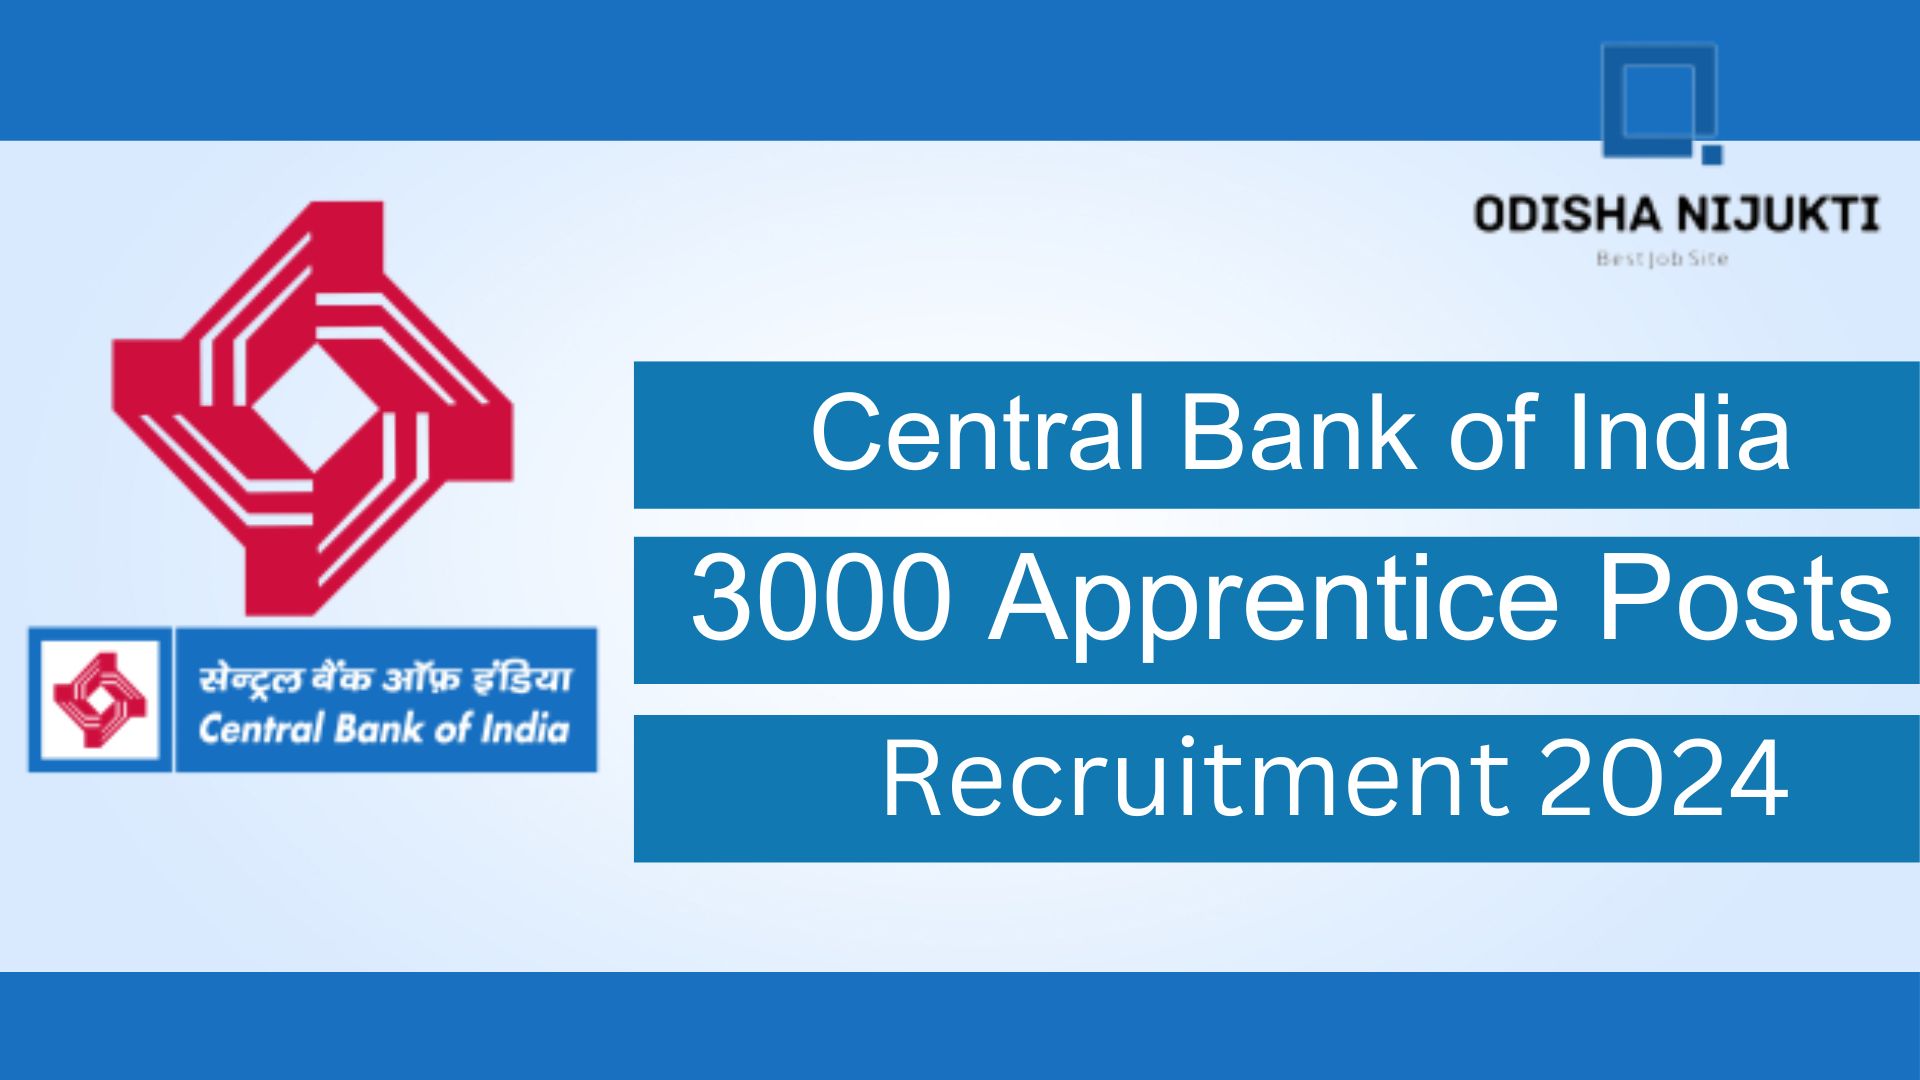 Central-Bank-of-India-Apprentice-Recruitment-2024-Apply-Online-for-3000-Apprentice-Posts-